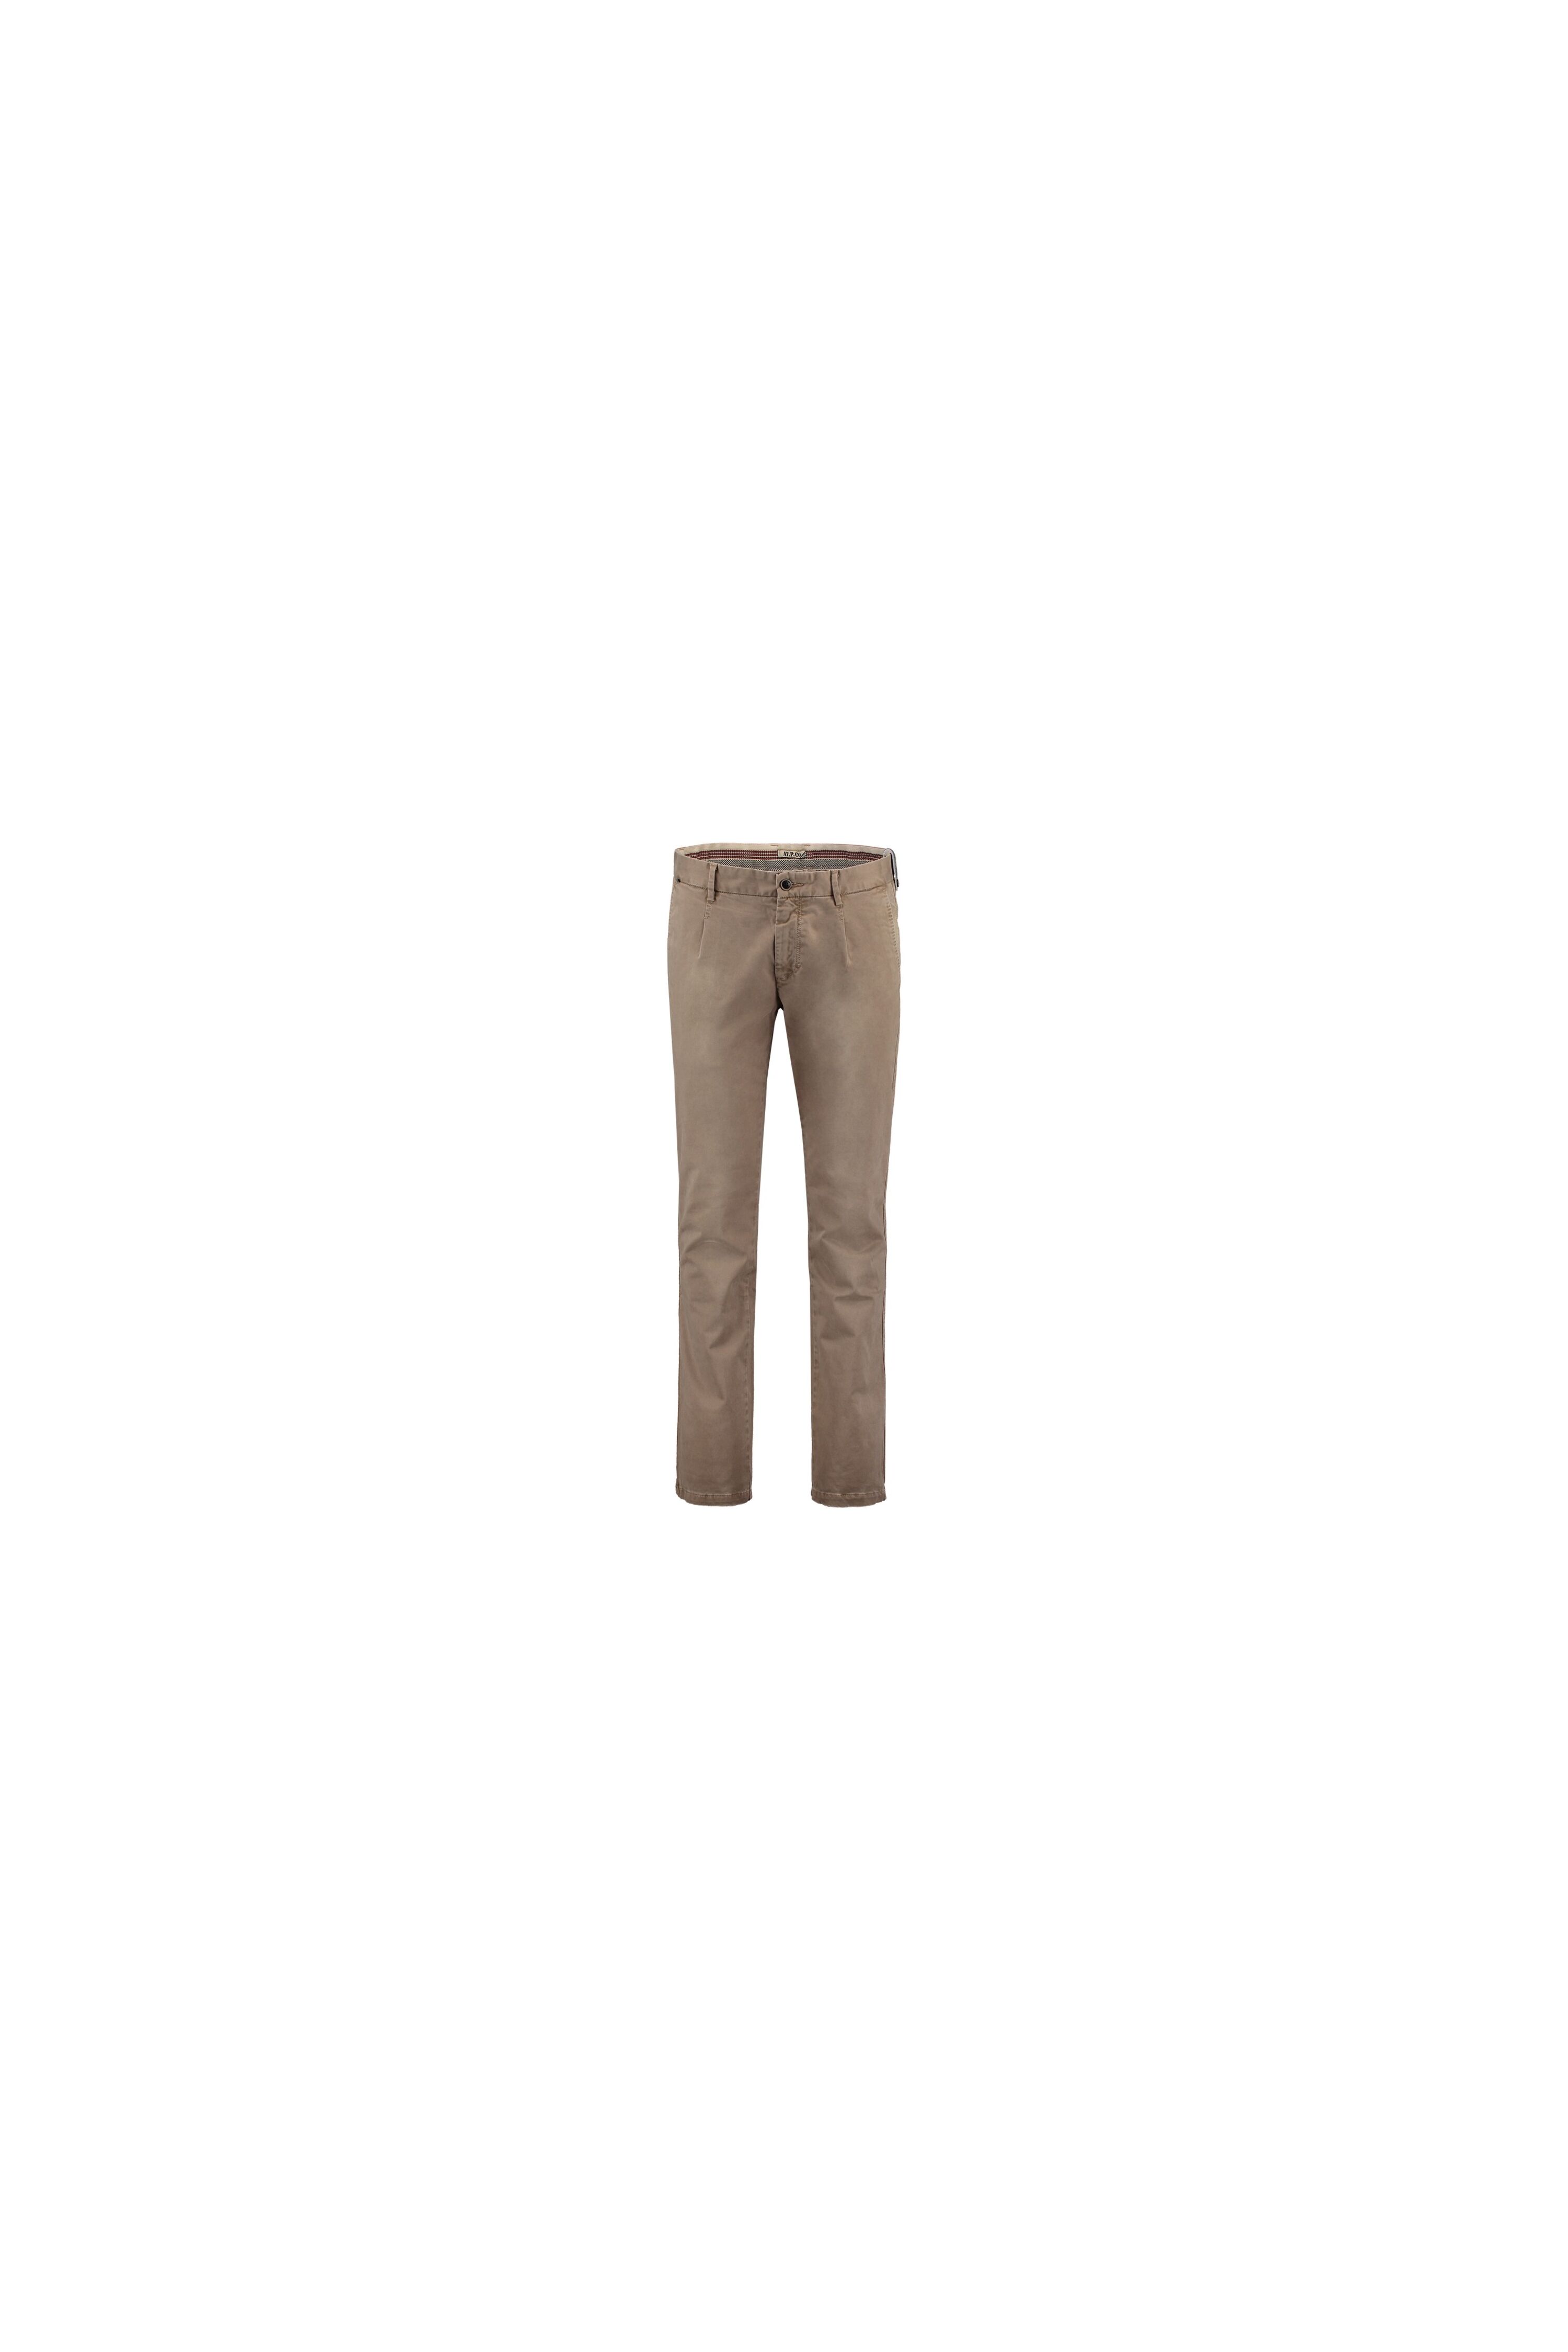 AT.P.CO Gaspar Chino met stretch in camel 260 | Bloom Fashion